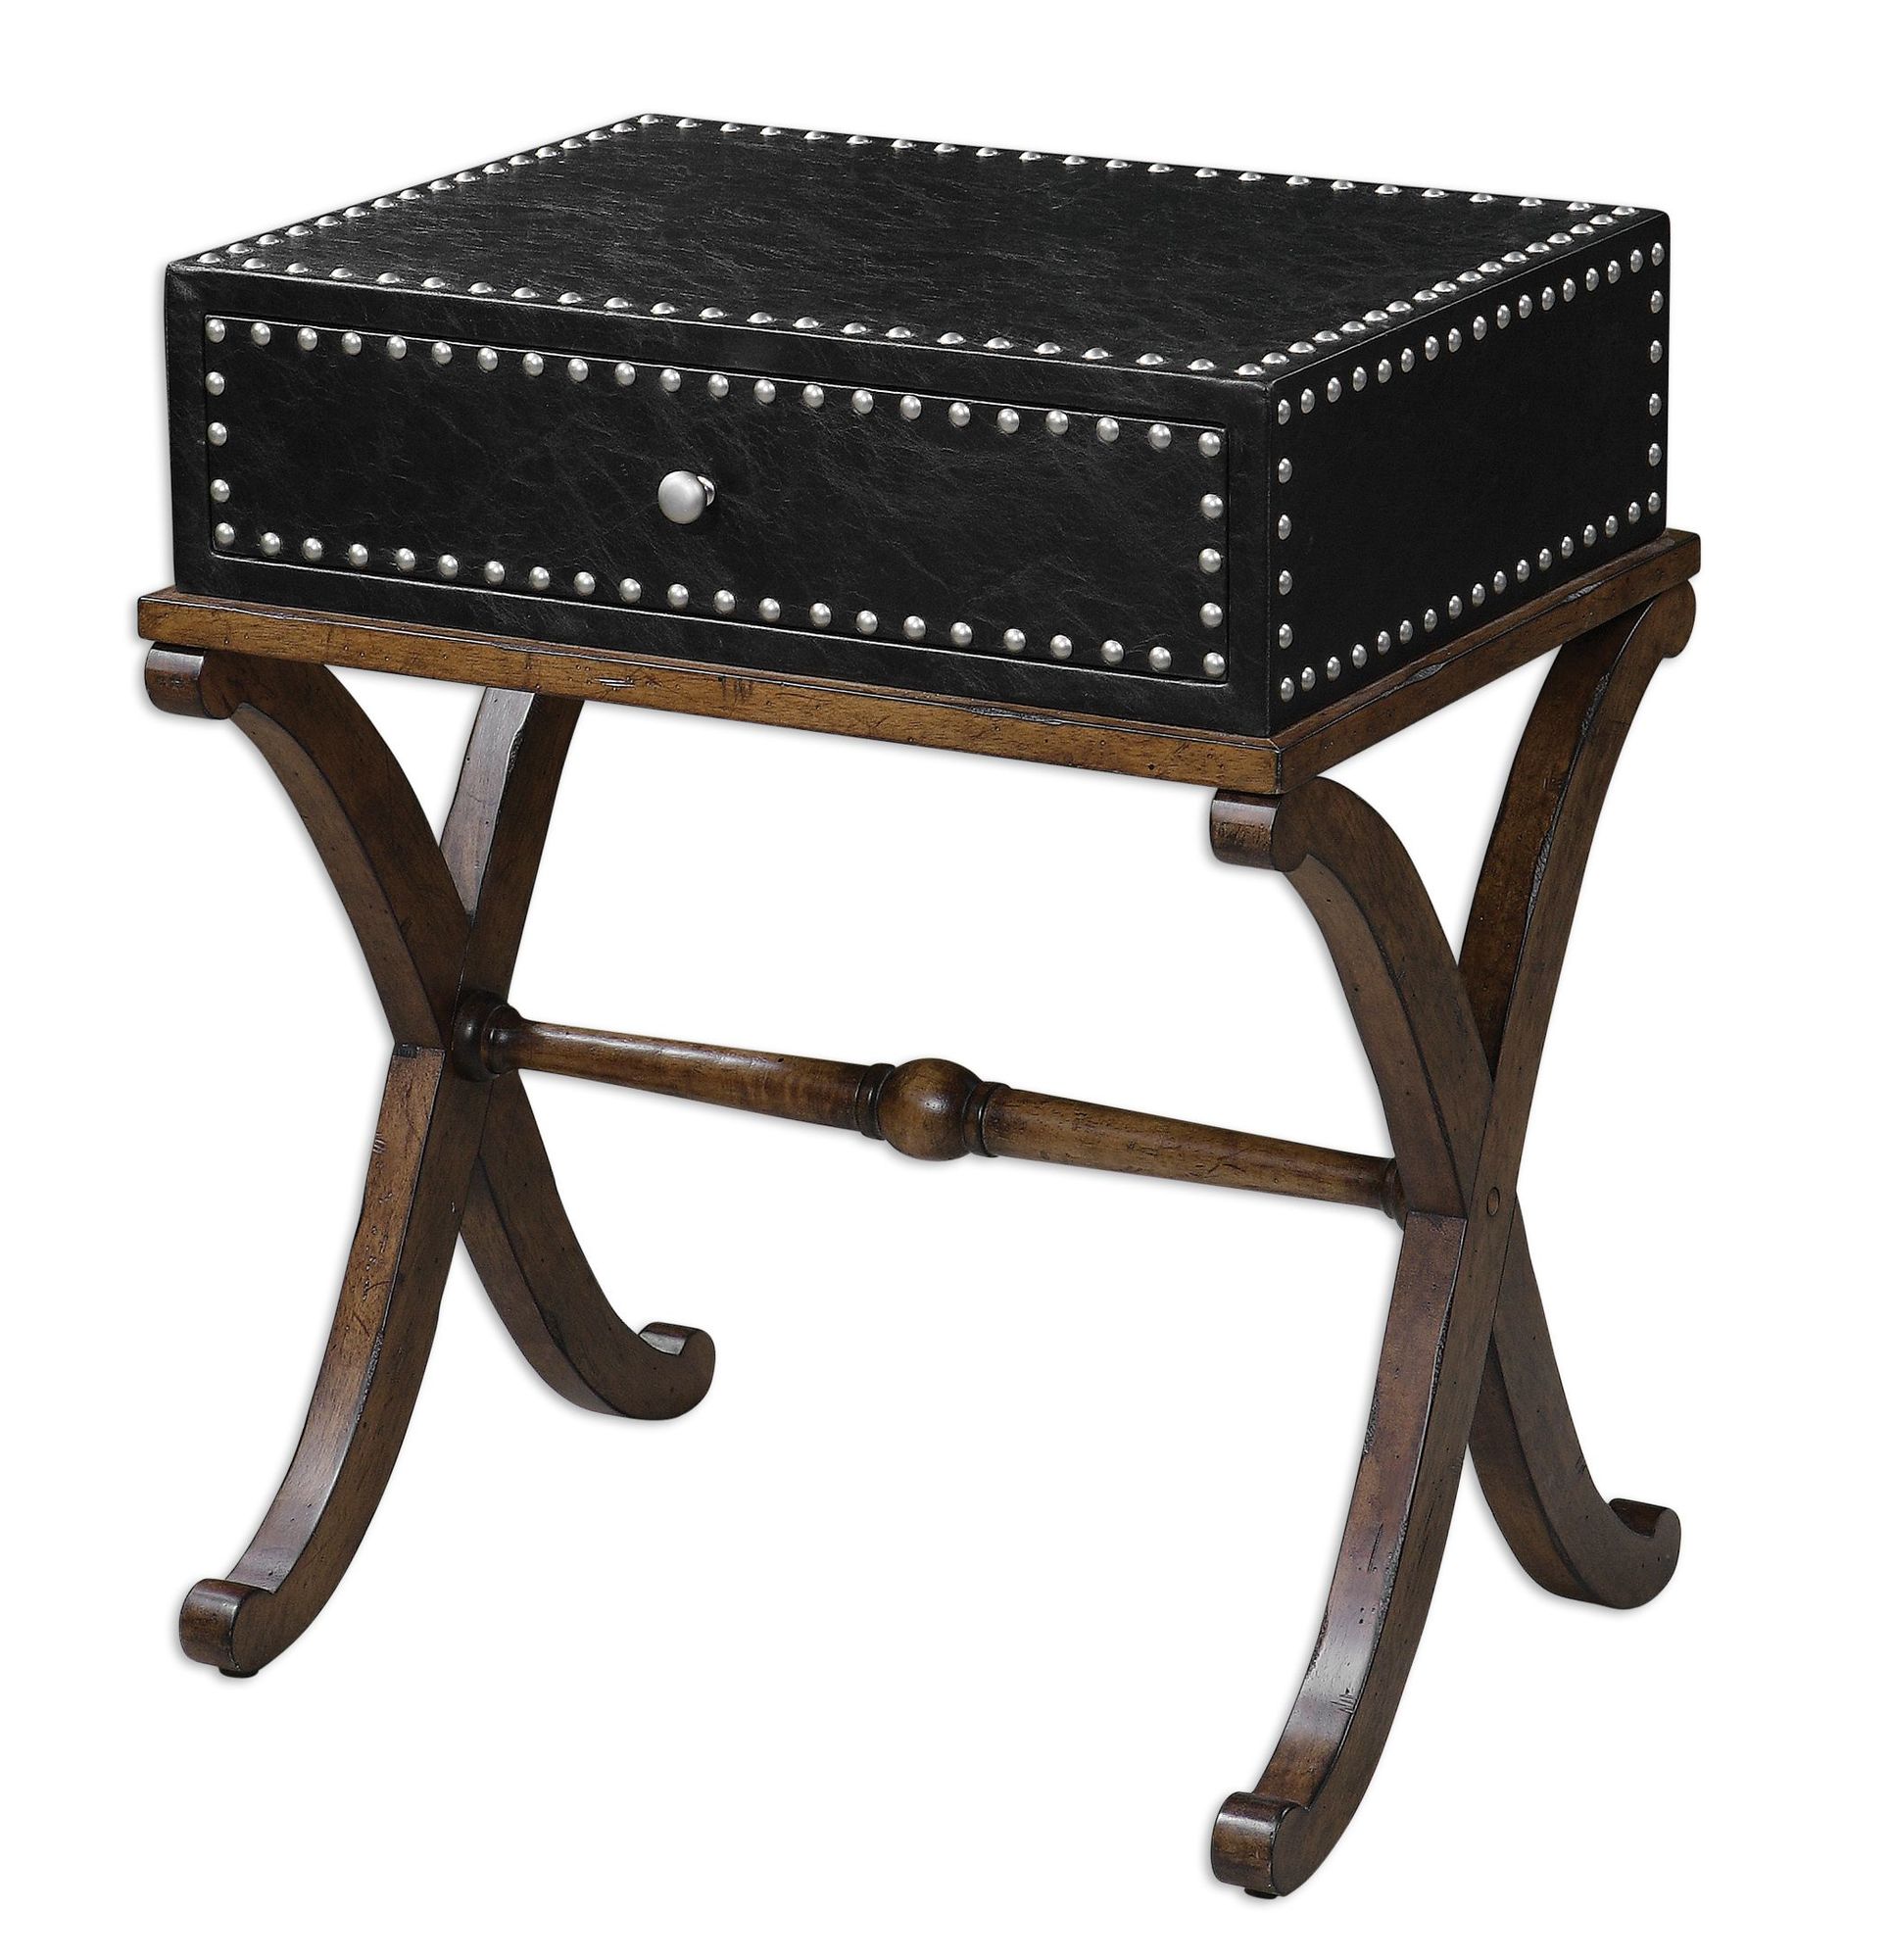 nailhead trimmed accent table black mathis brothers furniture with nailheads wicker storage coffee piece living room tables white west elm wood cooler bay barn door buffet ashley